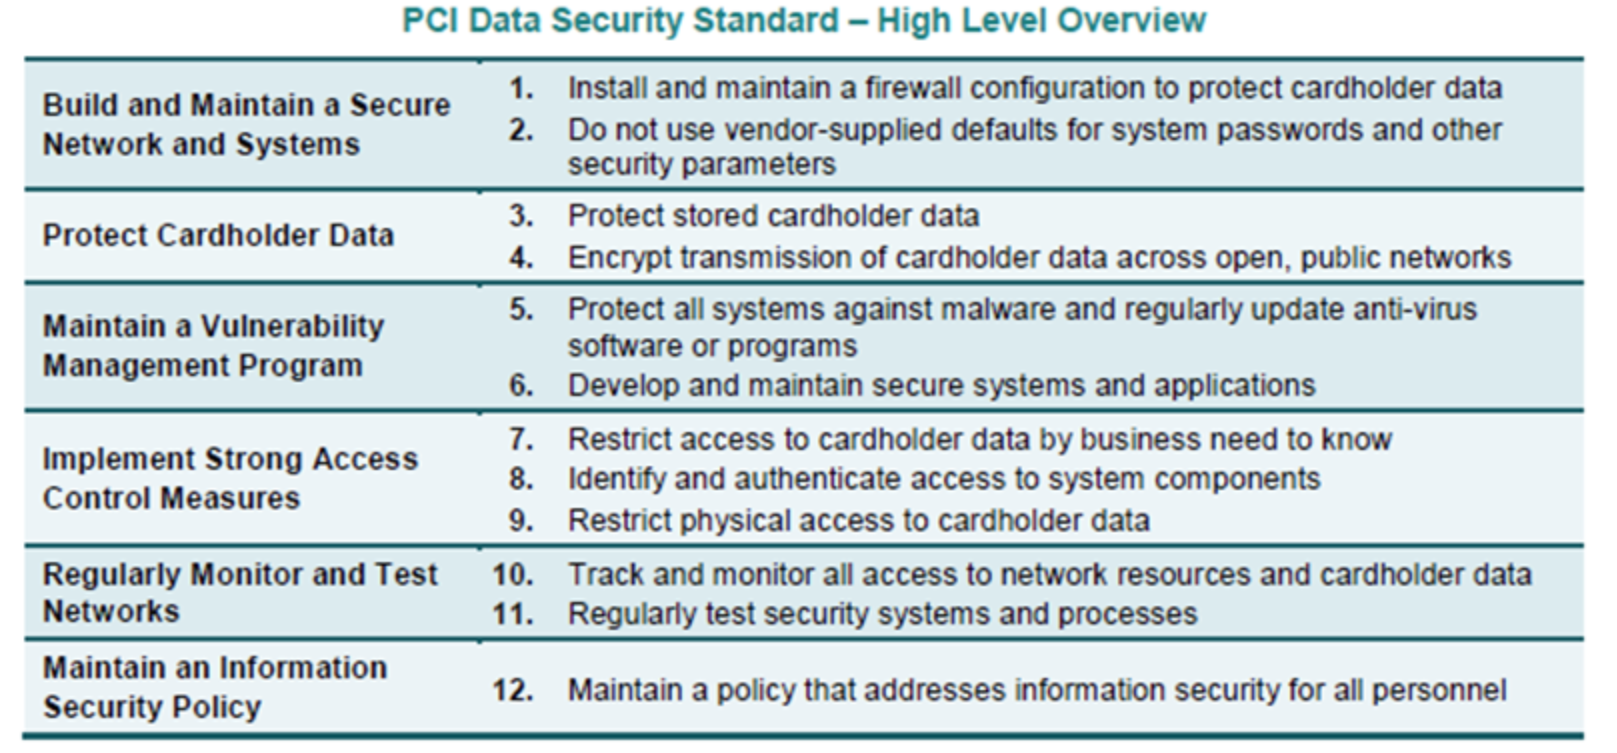 This is a PCI data security standard. we will talk it below